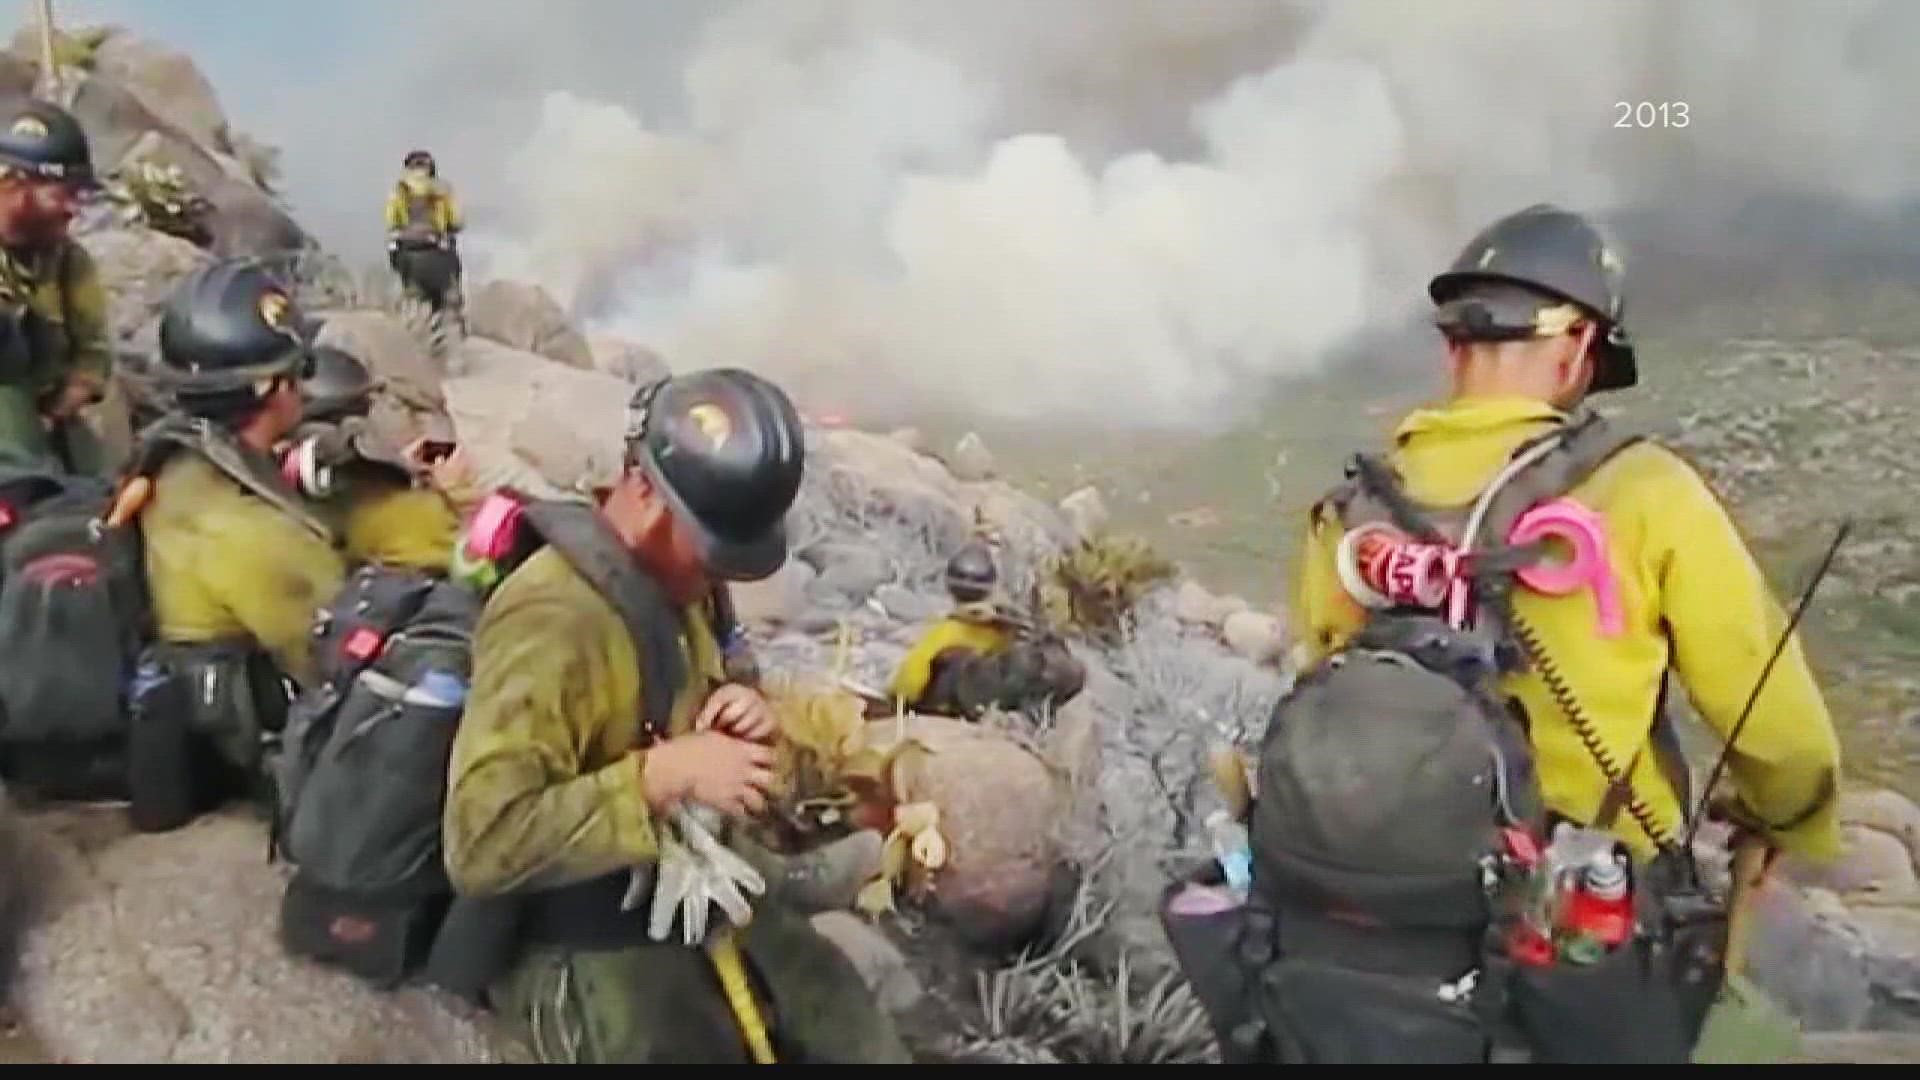 19 Granite Mountain hotshots perished on Yarnell Hill nine years ago. On the anniversary of their deaths, townspeople and family members honored the lives lost.